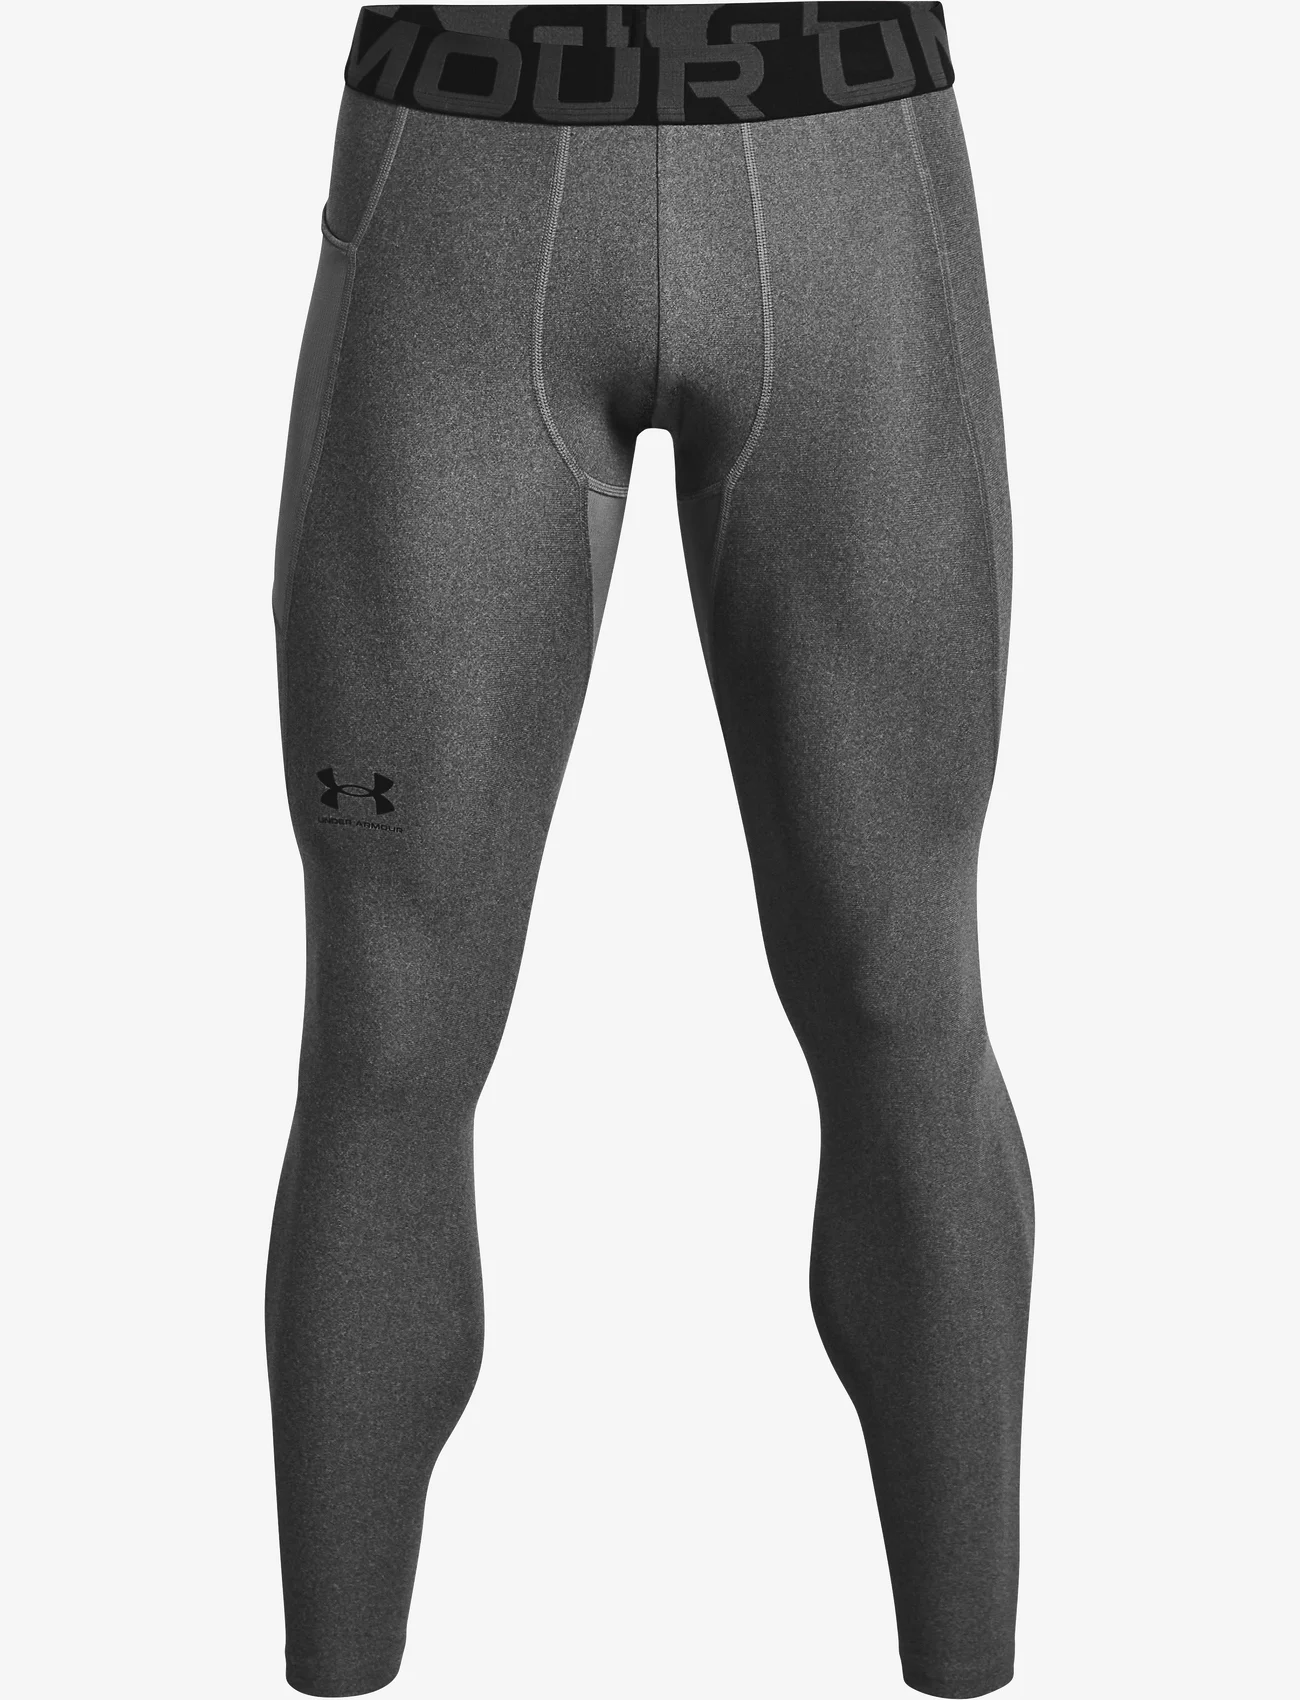 Under Armour - UA HG Armour Leggings - running & training tights - carbon heather - 0